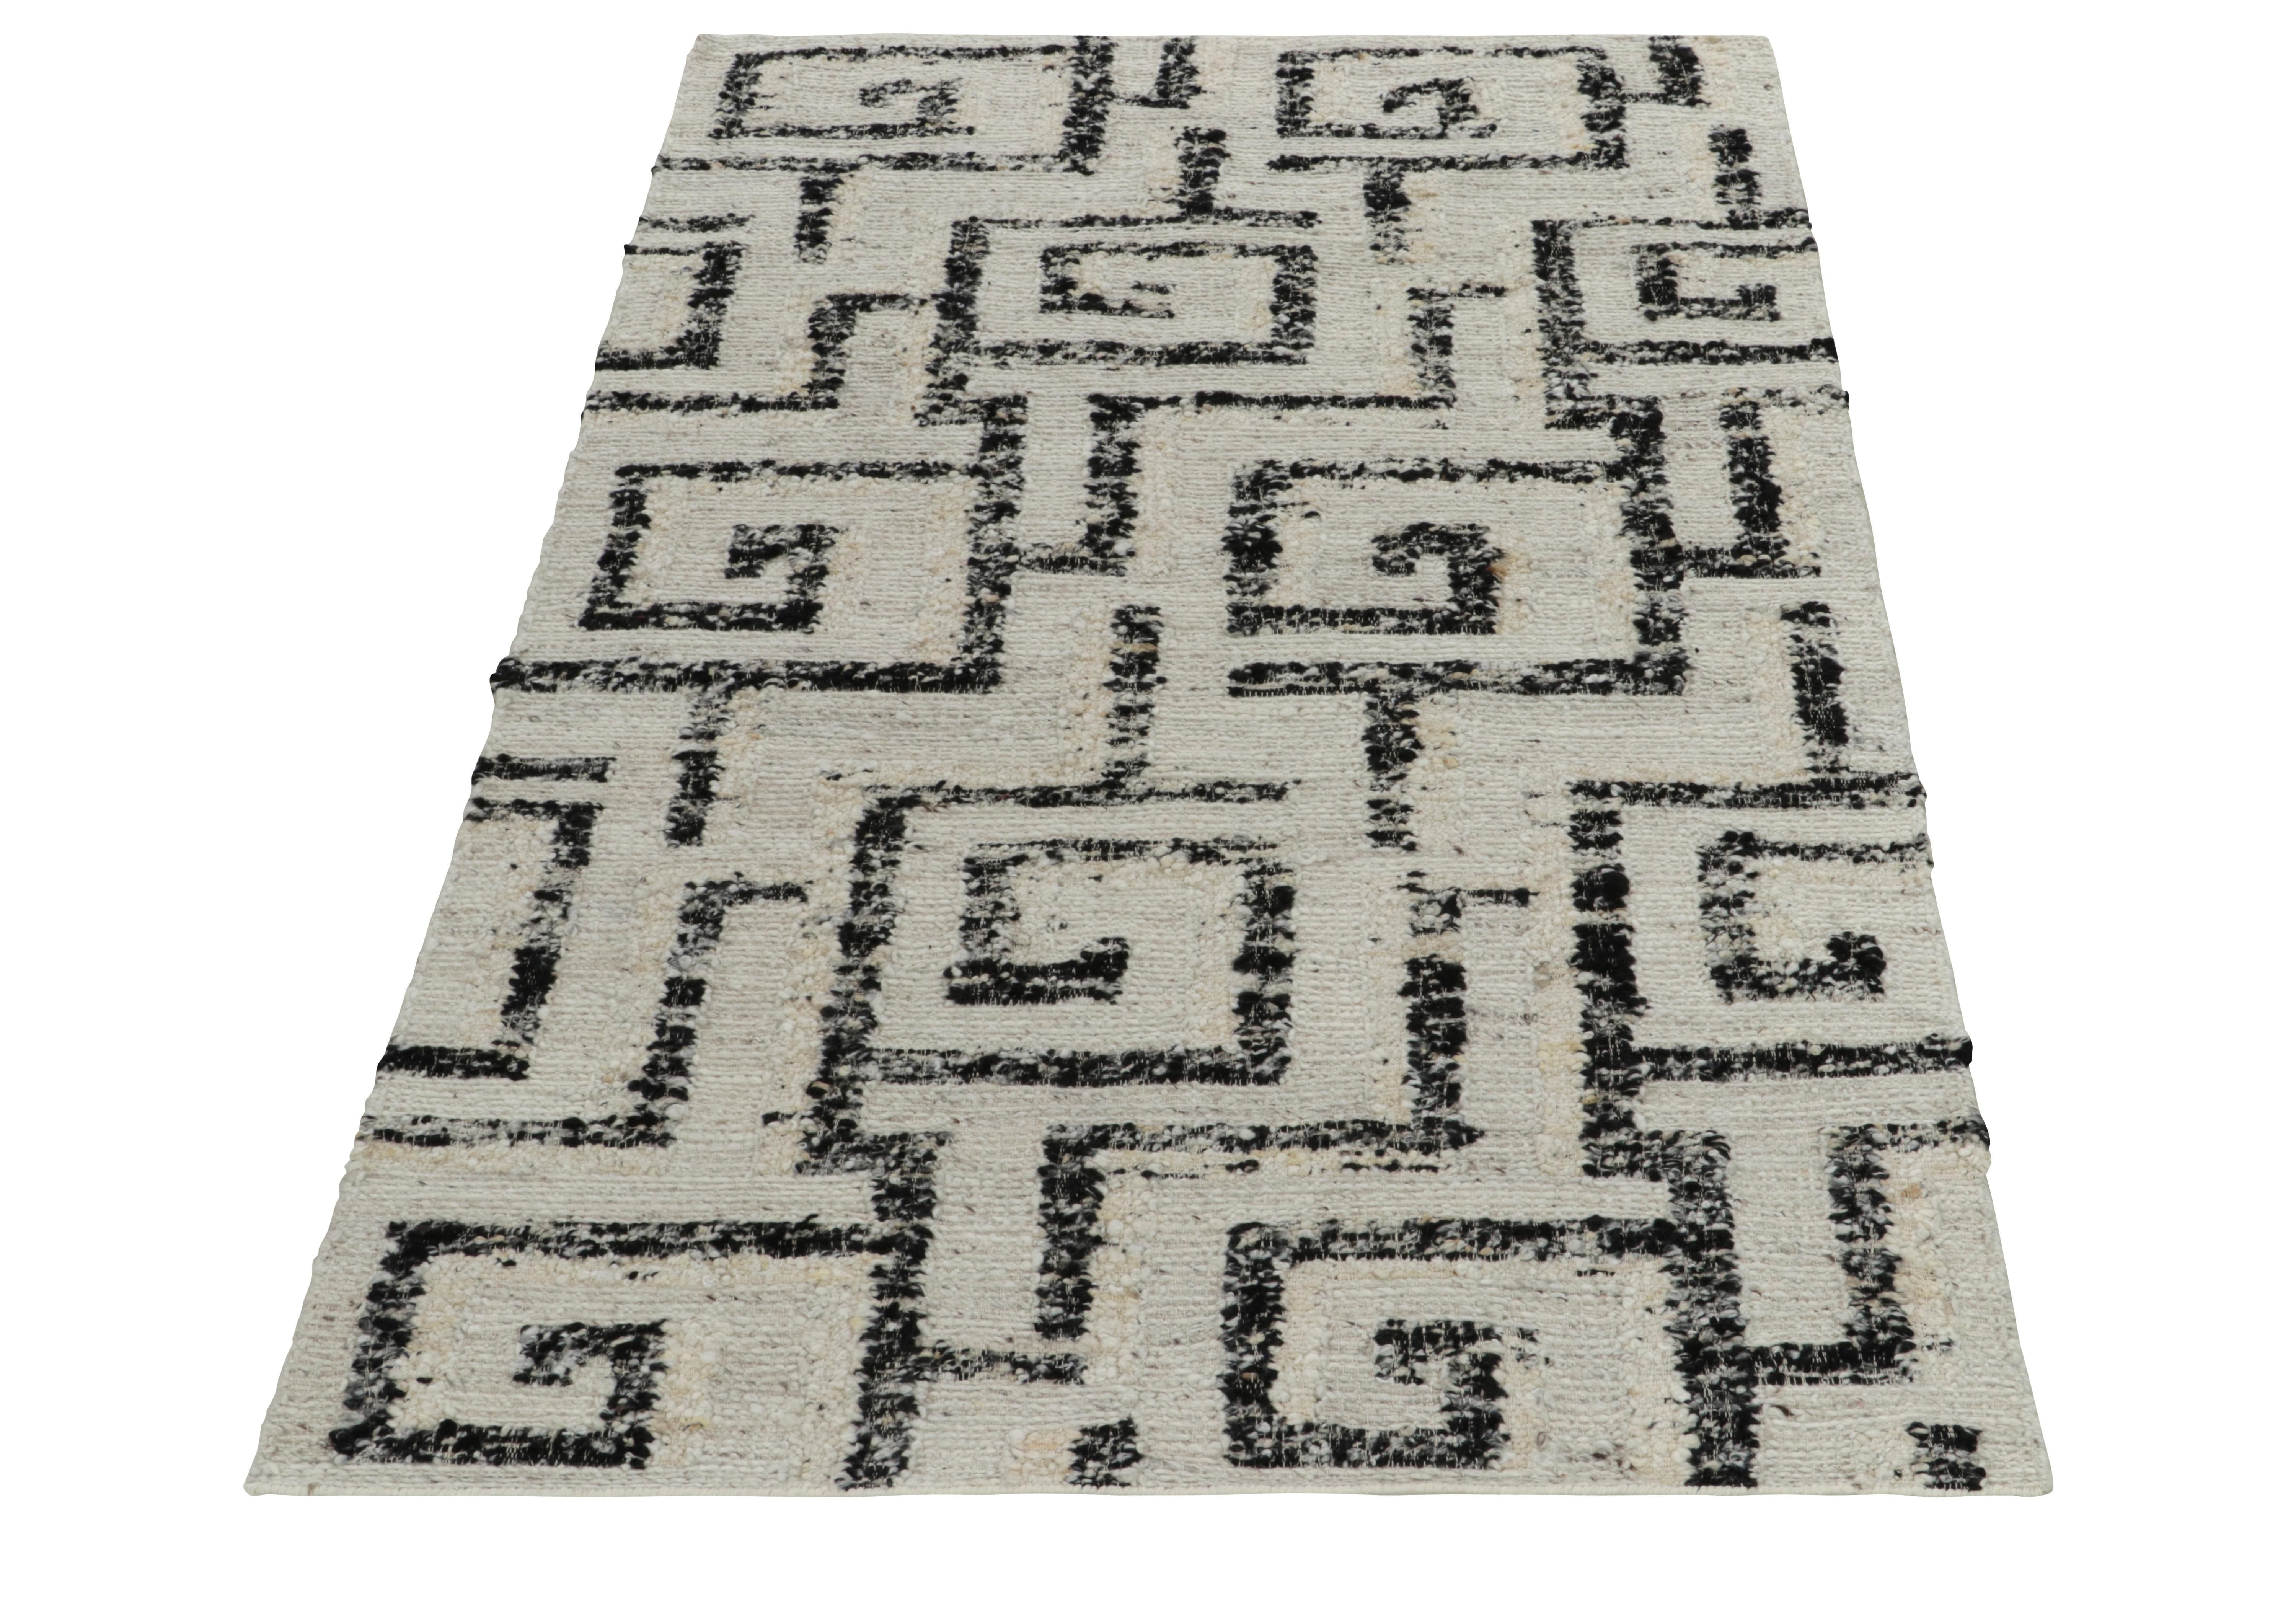 Rug & Kilim unveils its innovation in style & technique with this 5x8 flat weave rug, exploring bold positive-negative hues and Art Deco styles. The Kilim features a modern geometric pattern in ivory & charcoal black conceptualized by handspinning a